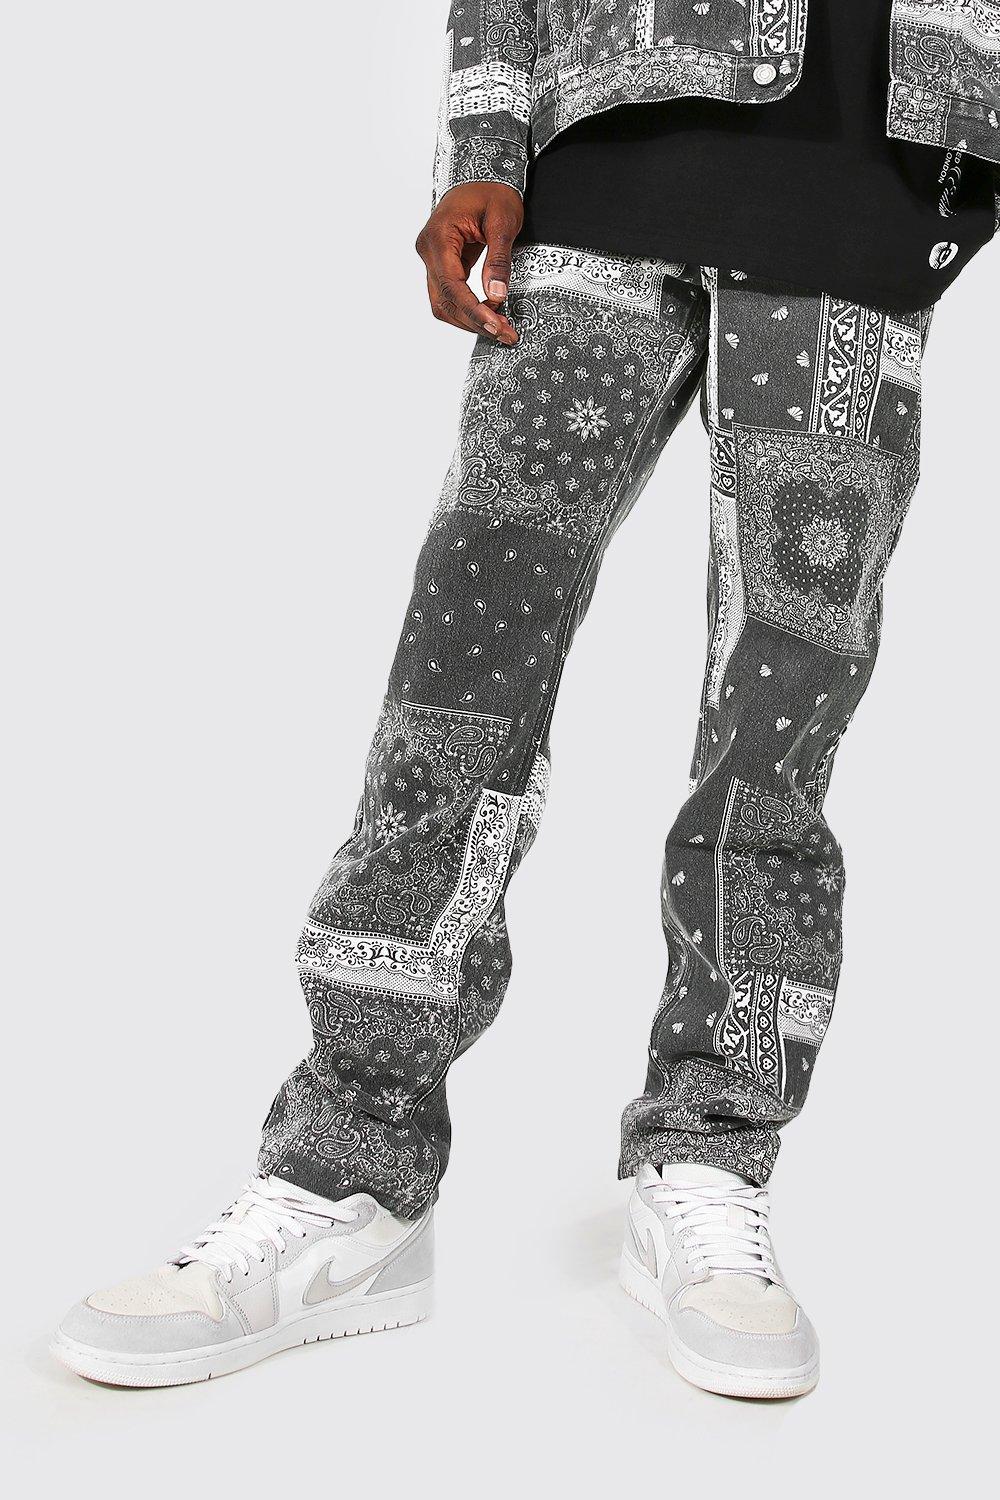 BoohooMAN Denim Relaxed Fit Washed Bandana Print Jeans in Mid Grey 